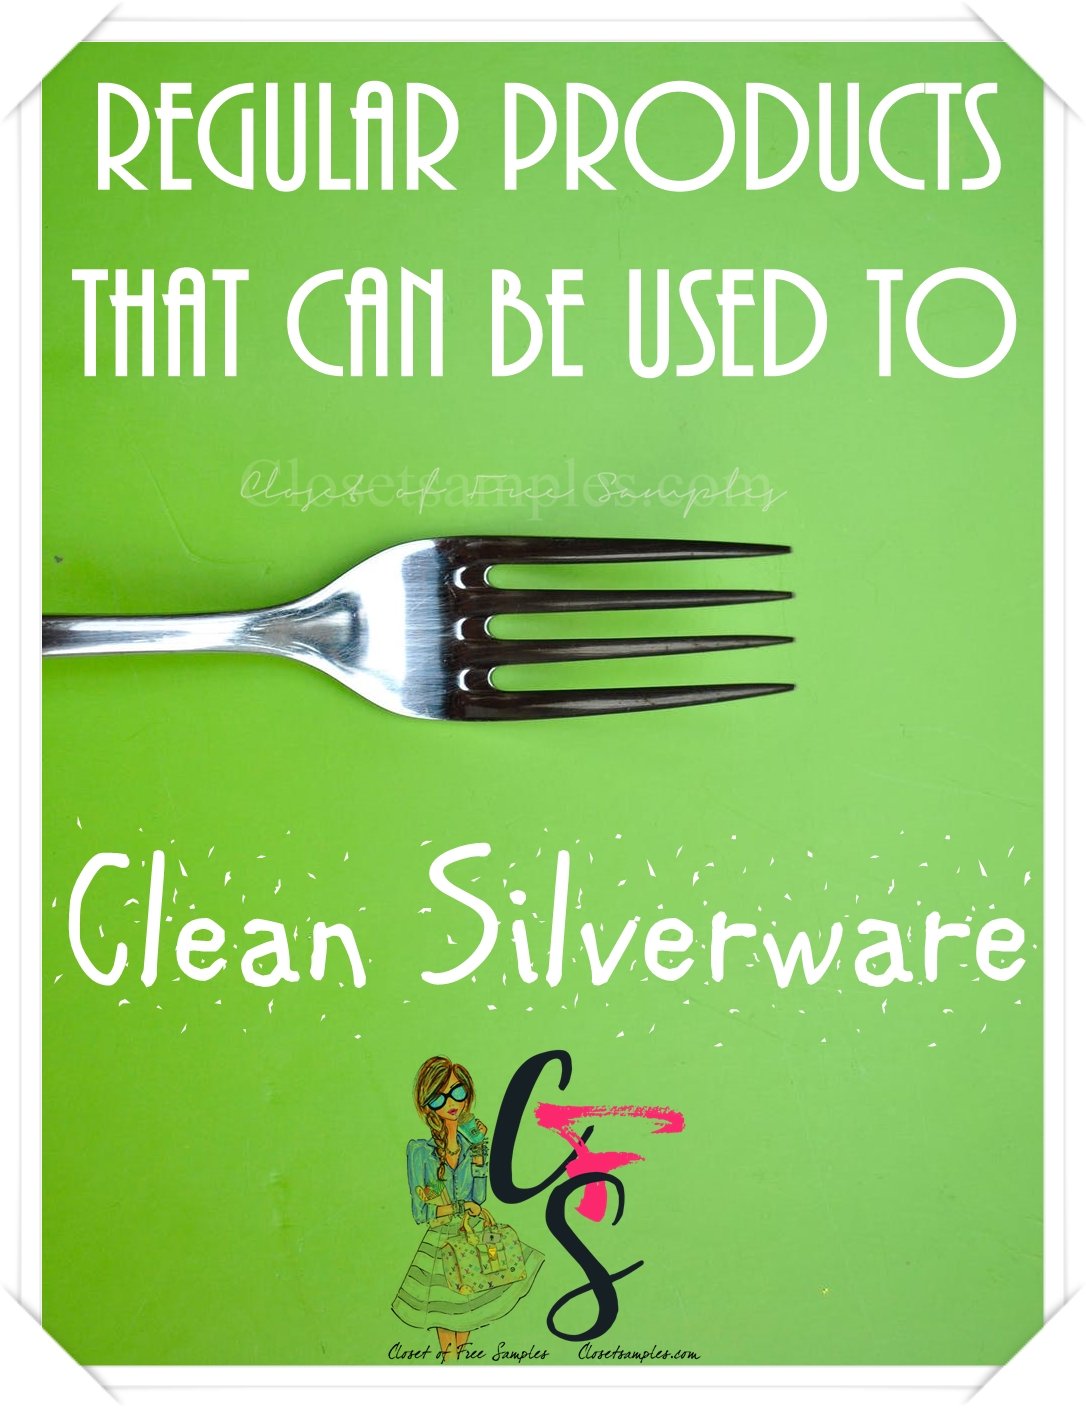 regular-products-that-can-clean-silverware.jpeg